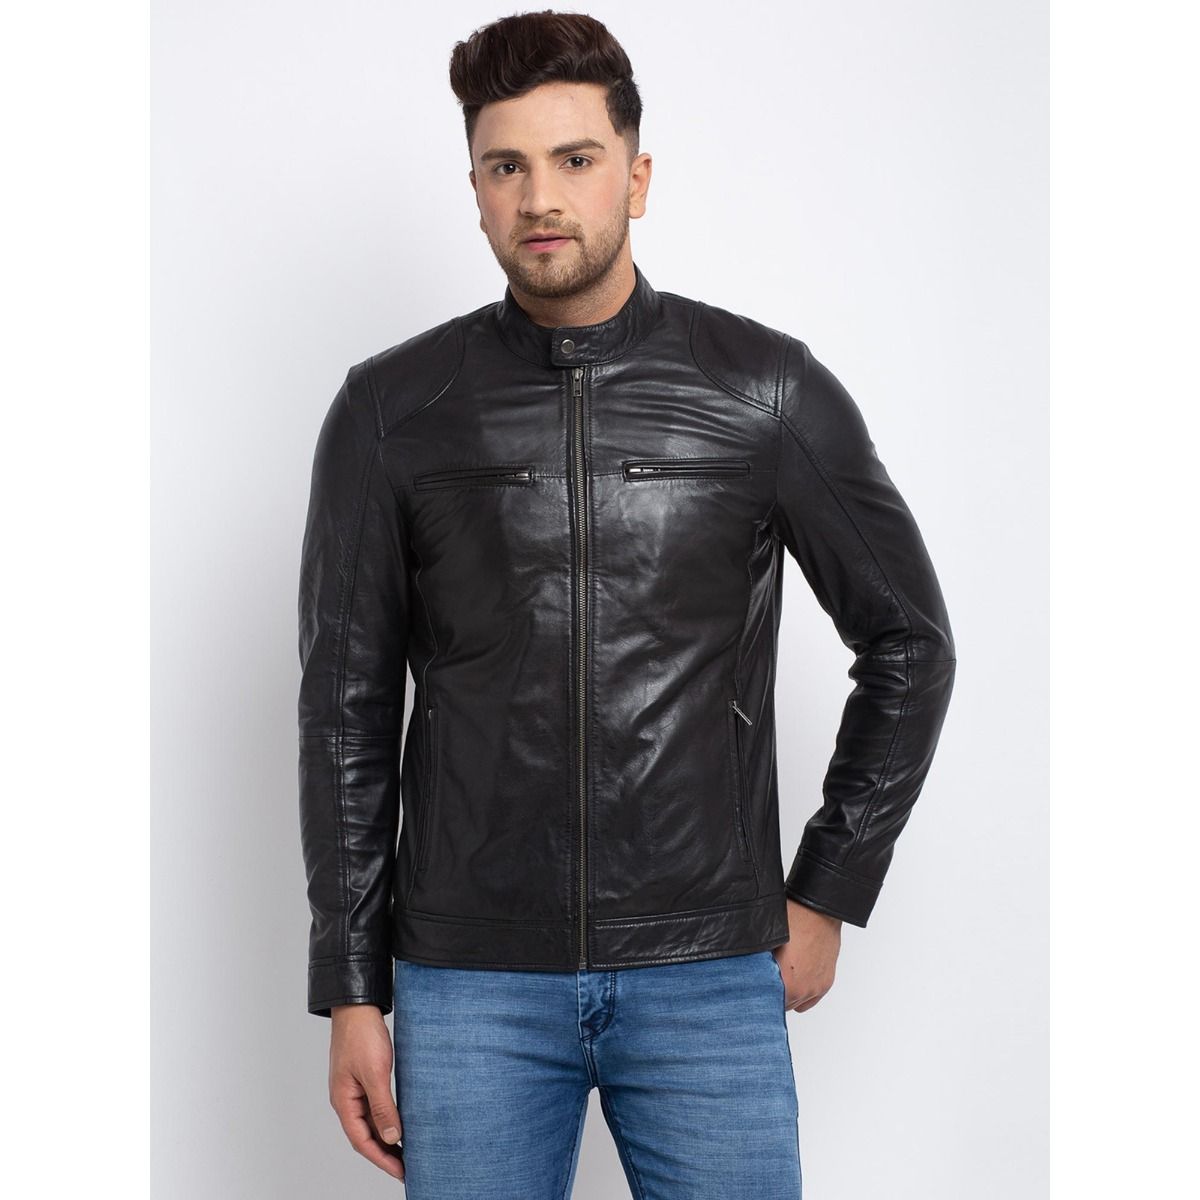 Buy Men's Leather Jacket Brown Genuine Leather Jacket Online in India - Etsy